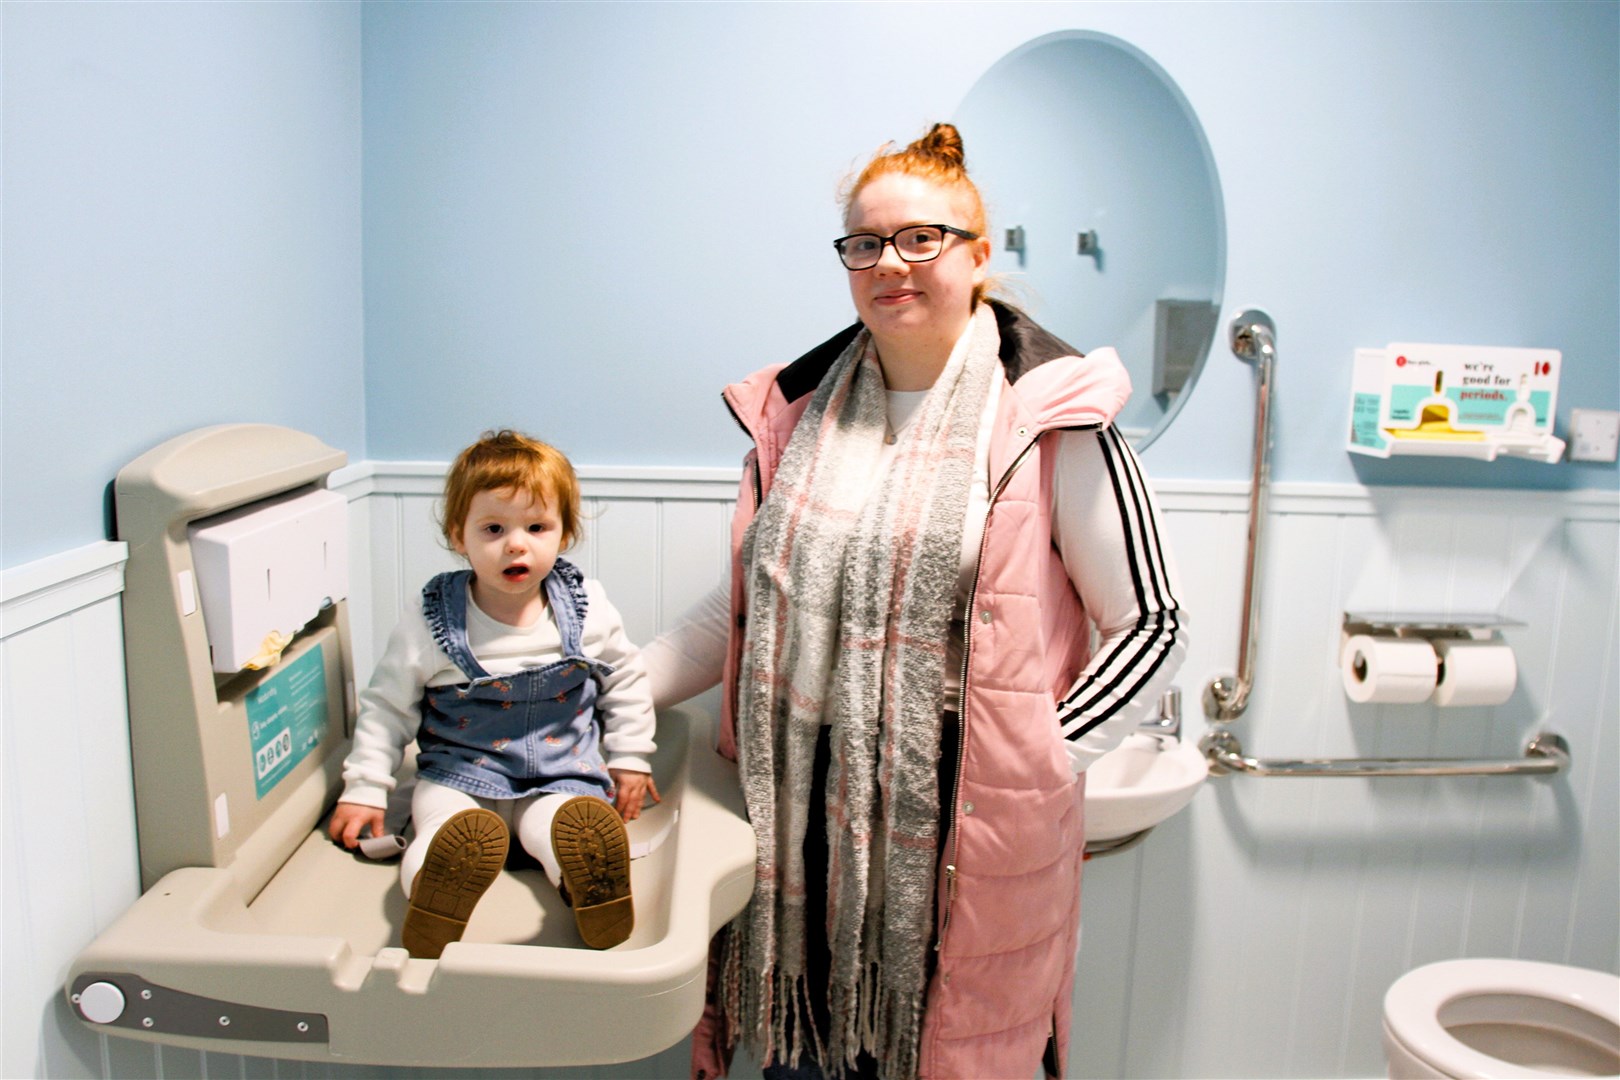 ME FIRST! 19 month old Ava Gordon was first to try out the baby changing facilities with Mum (Youth Development Officer) Rachel Harold.